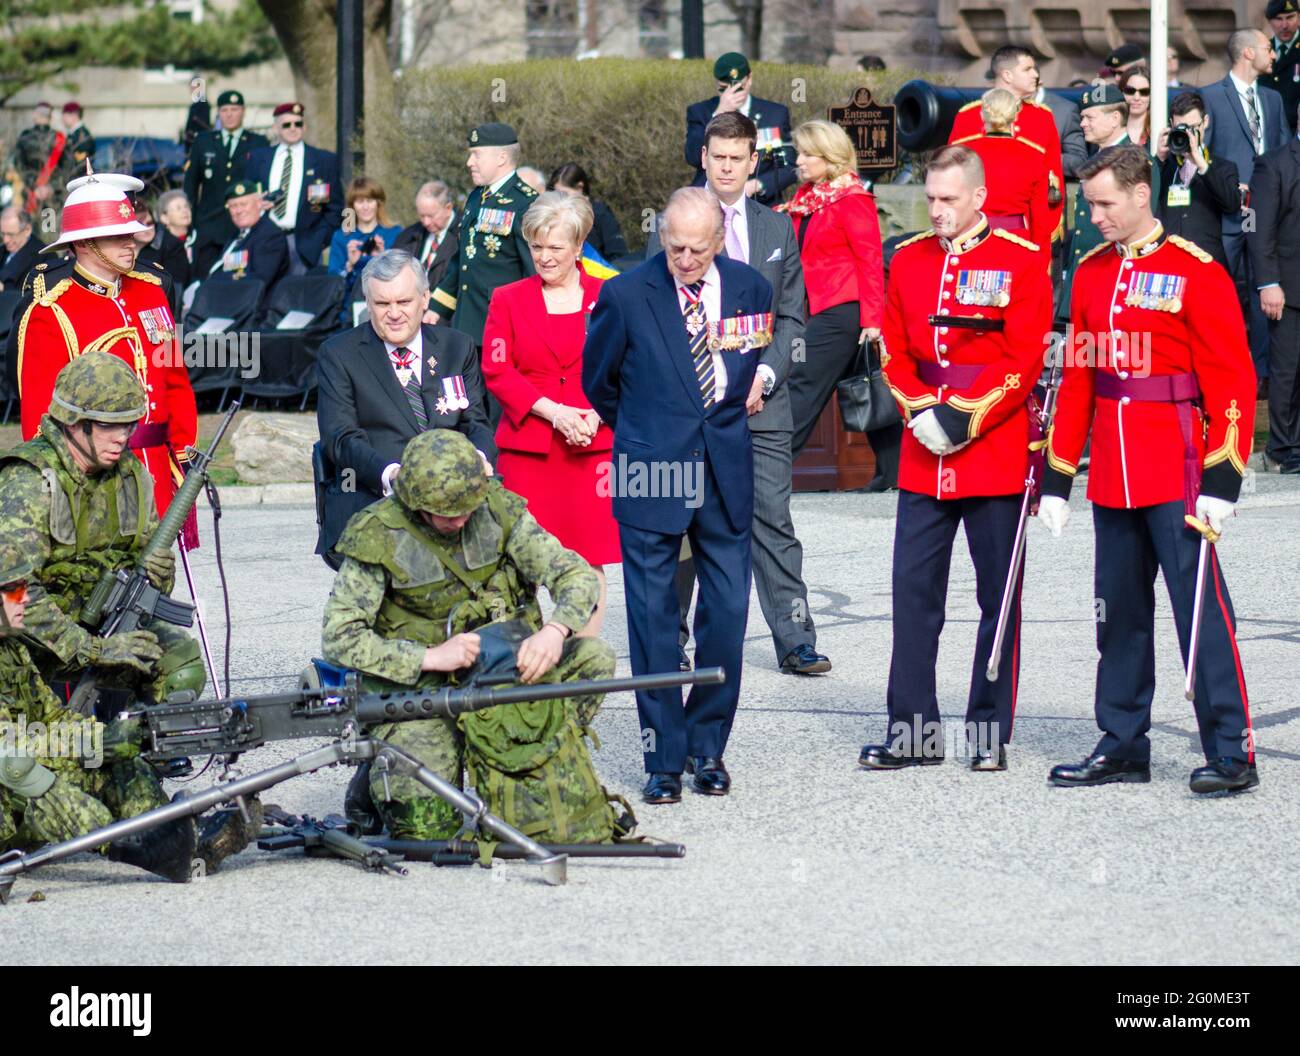 The City of Toronto and the Canadian Armed Forces (CAF) commemorate the 200th anniversary of the Battle of York   In the ceremony,  His Royal Highness Stock Photo